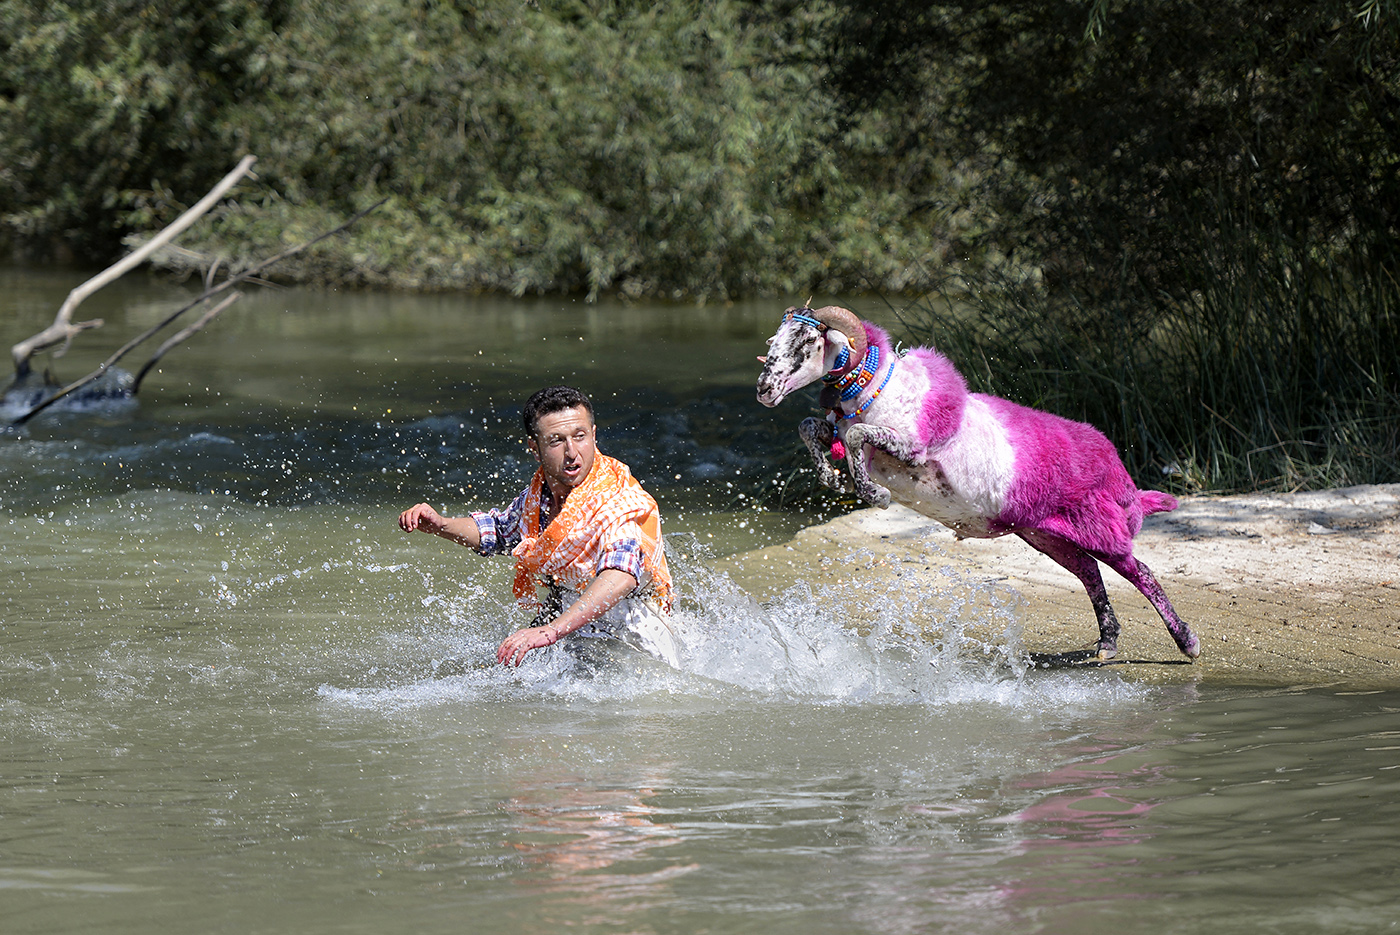 A shepherd and a sheep entering the Menderes River during the traditional sheep river-crossing competition in the village of Asagiseyit, near Denizli, Turkey, 25 August 2013. The centuries-old competition, part of the nomadic tradition, aims to measure the attentiveness of the animal to the herder.